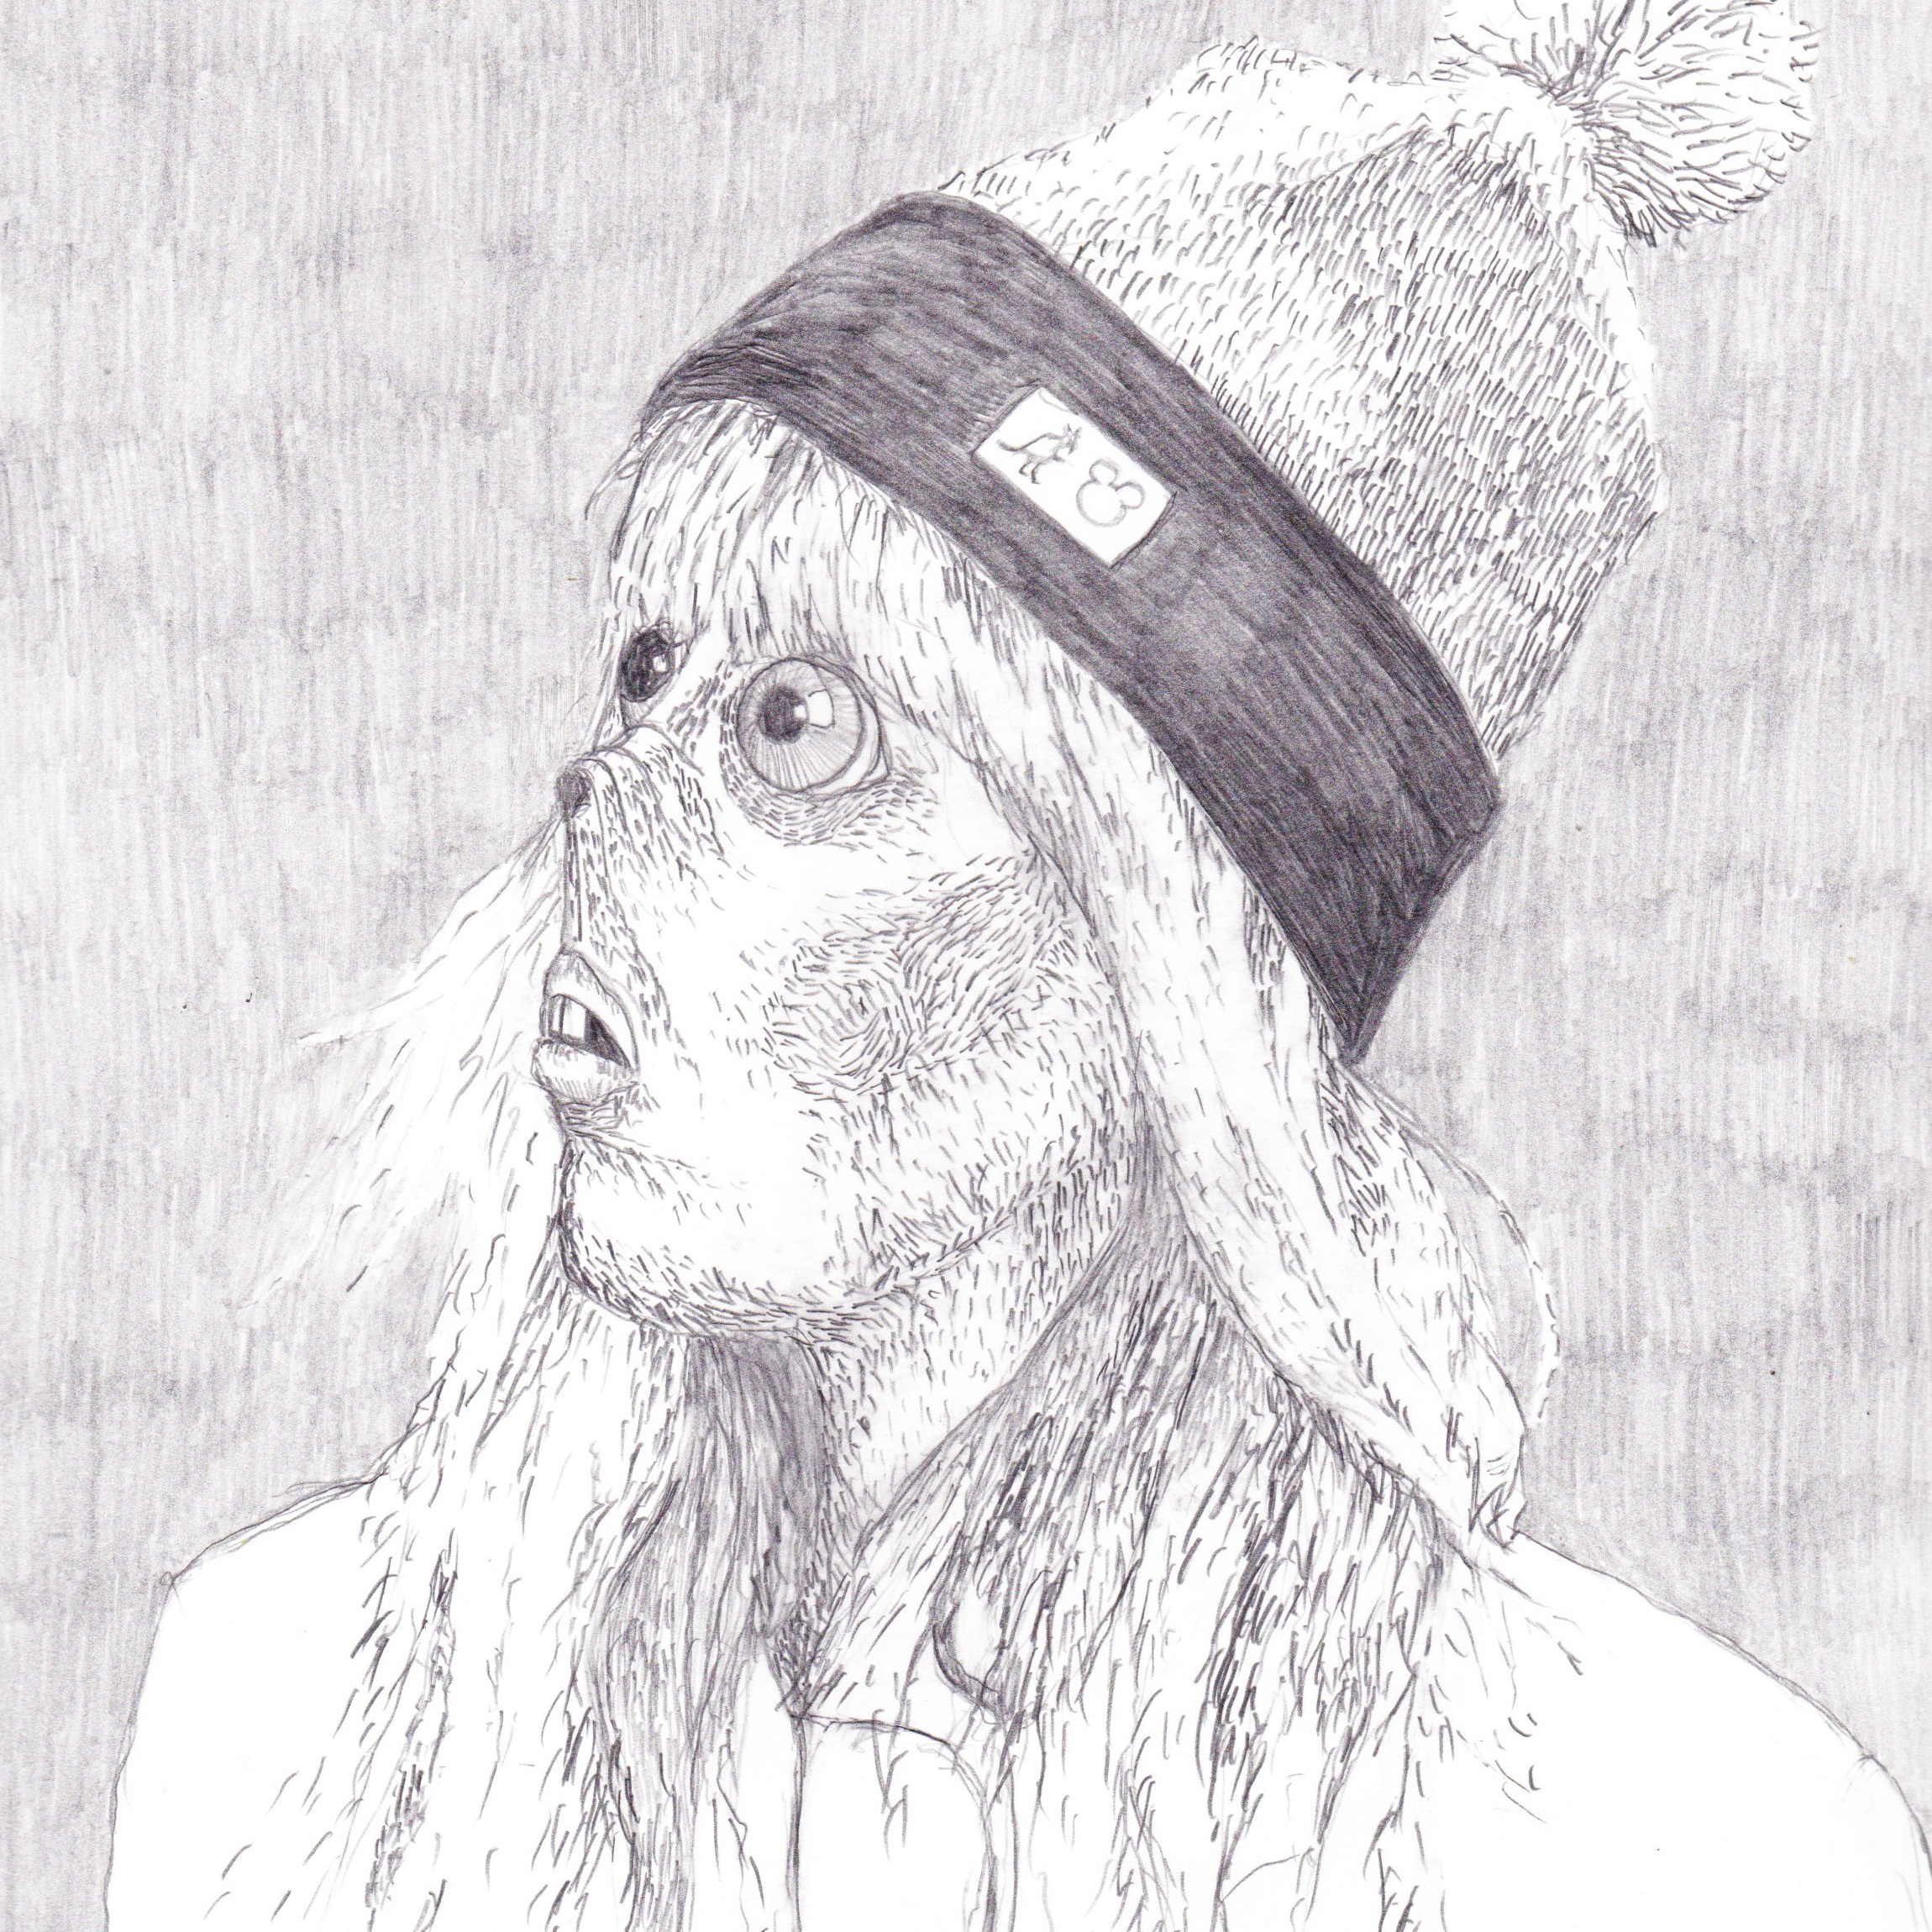 pencil drawing of a young woman who is mid-transformation into a nonspecific animal